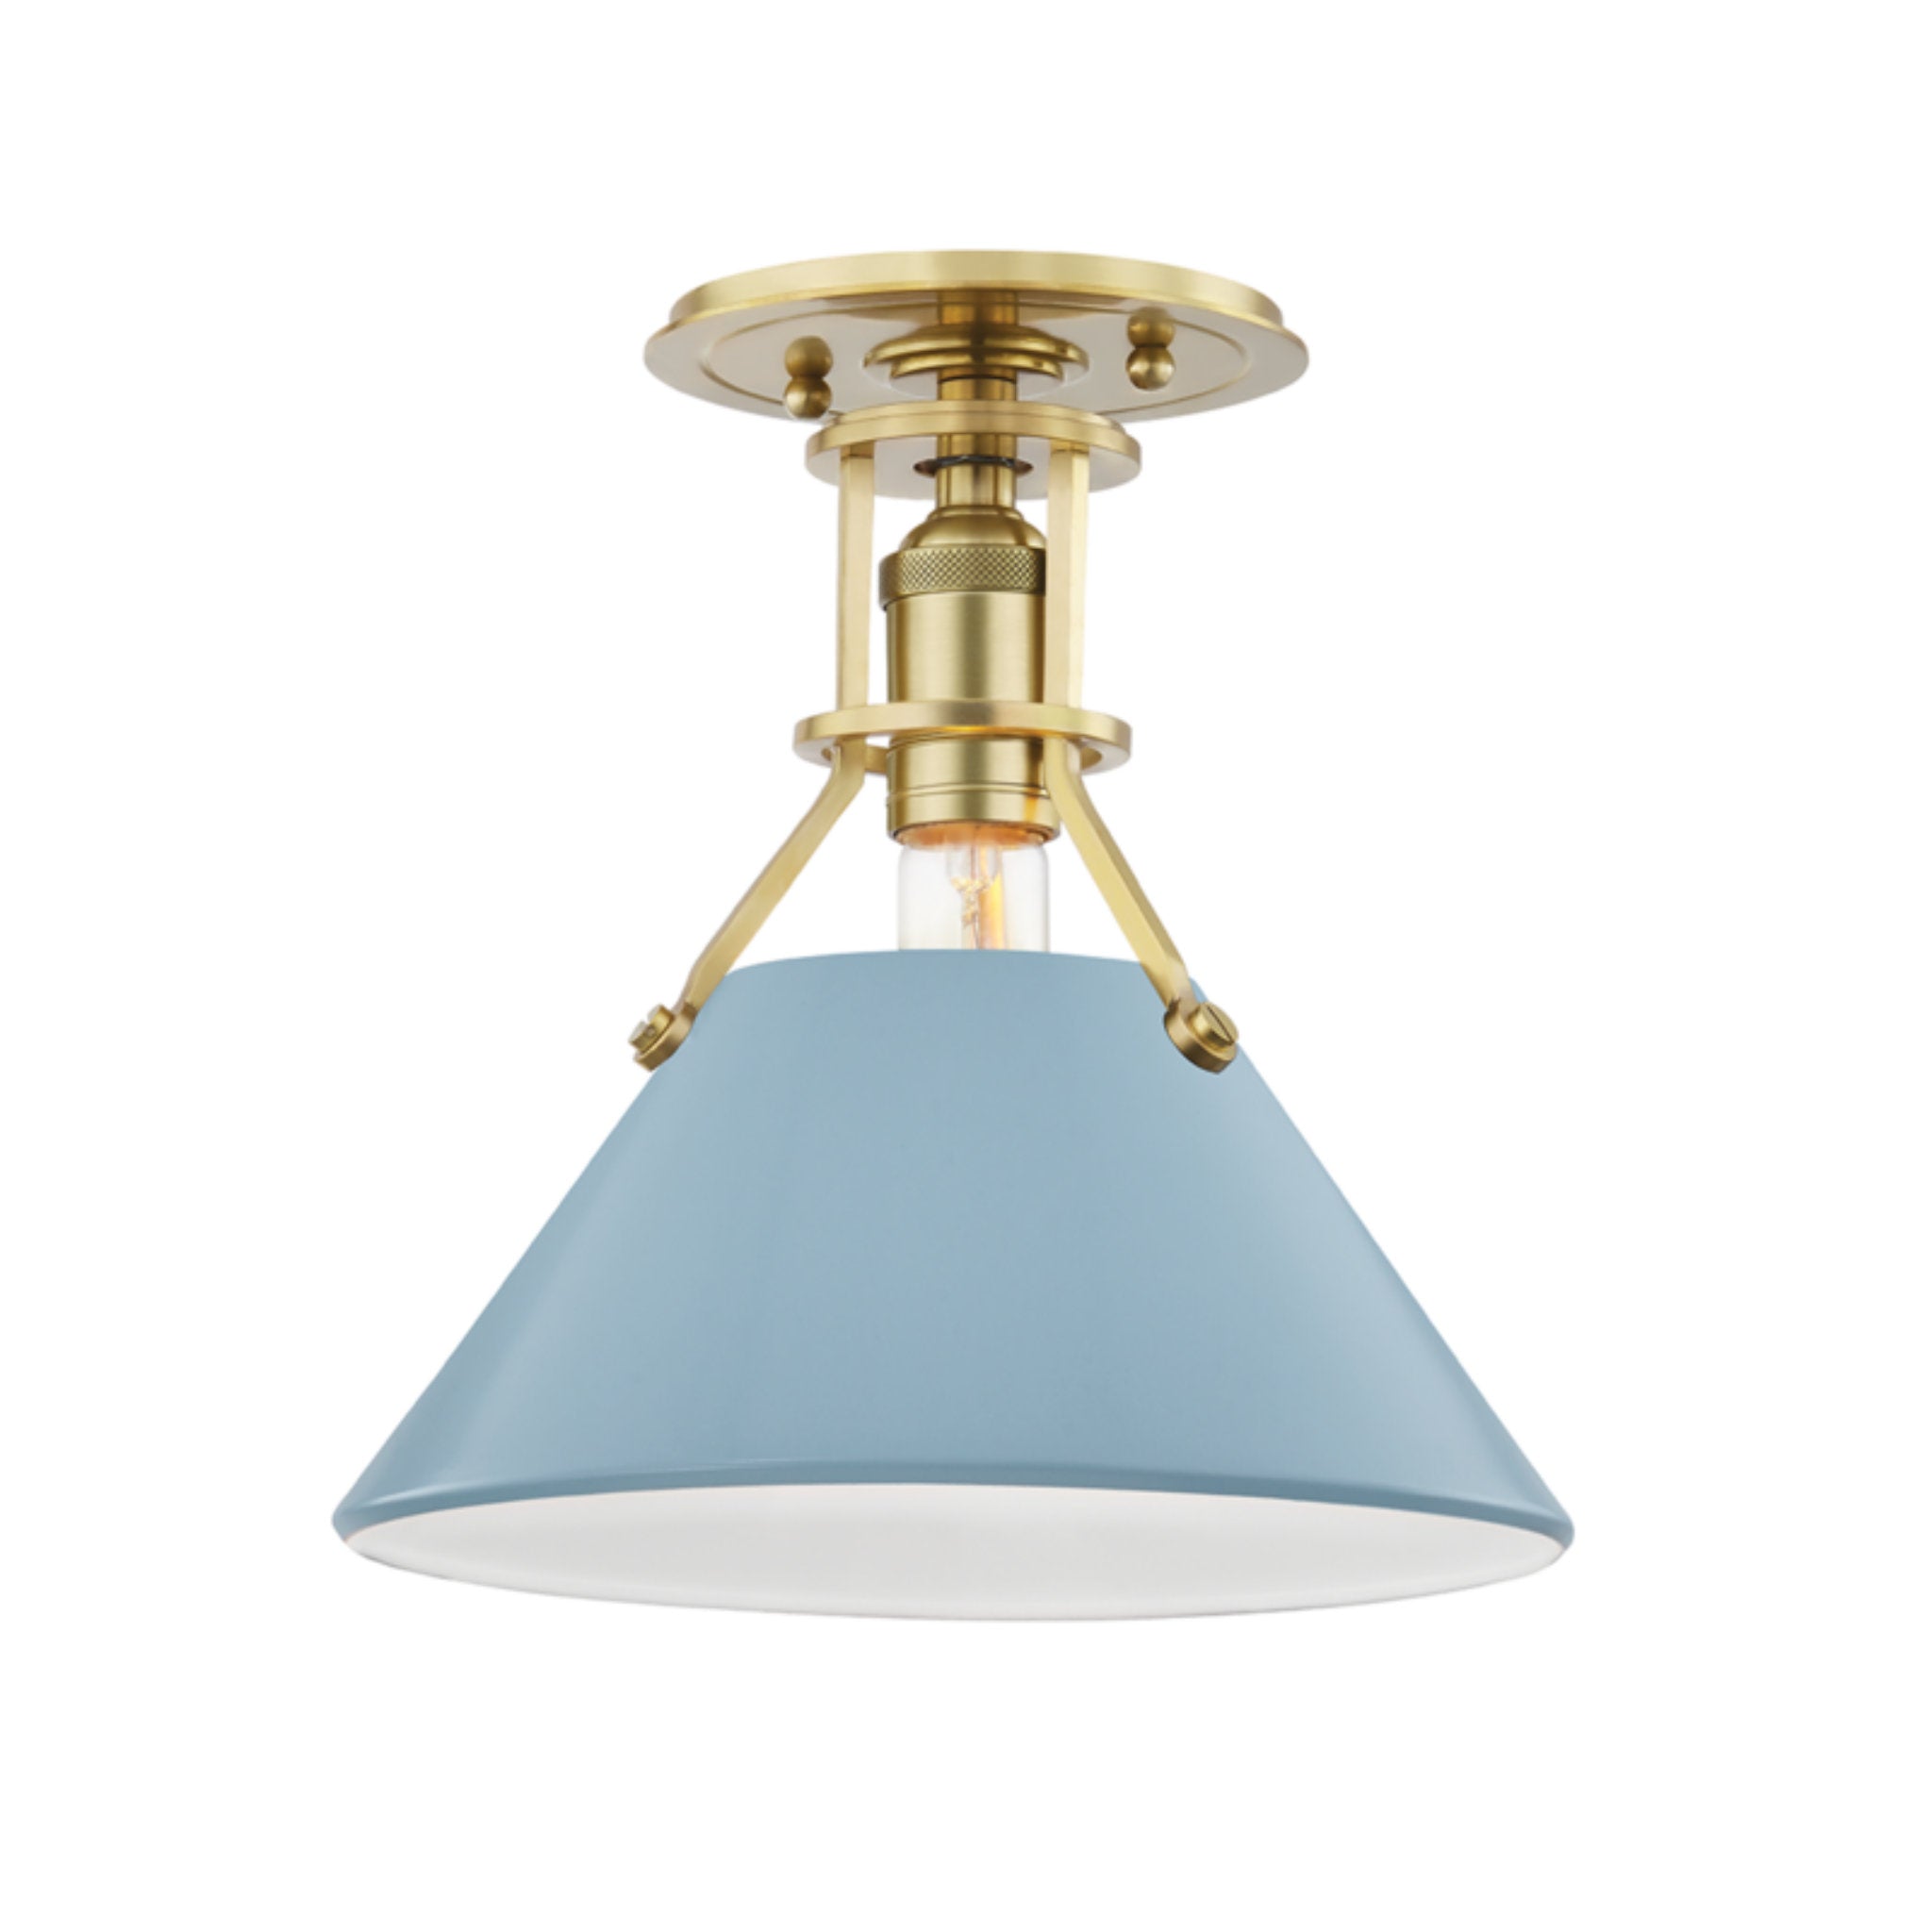 Painted No.2 1 Light Semi Flush in Aged Brass/blue Bird by Mark D. Sikes